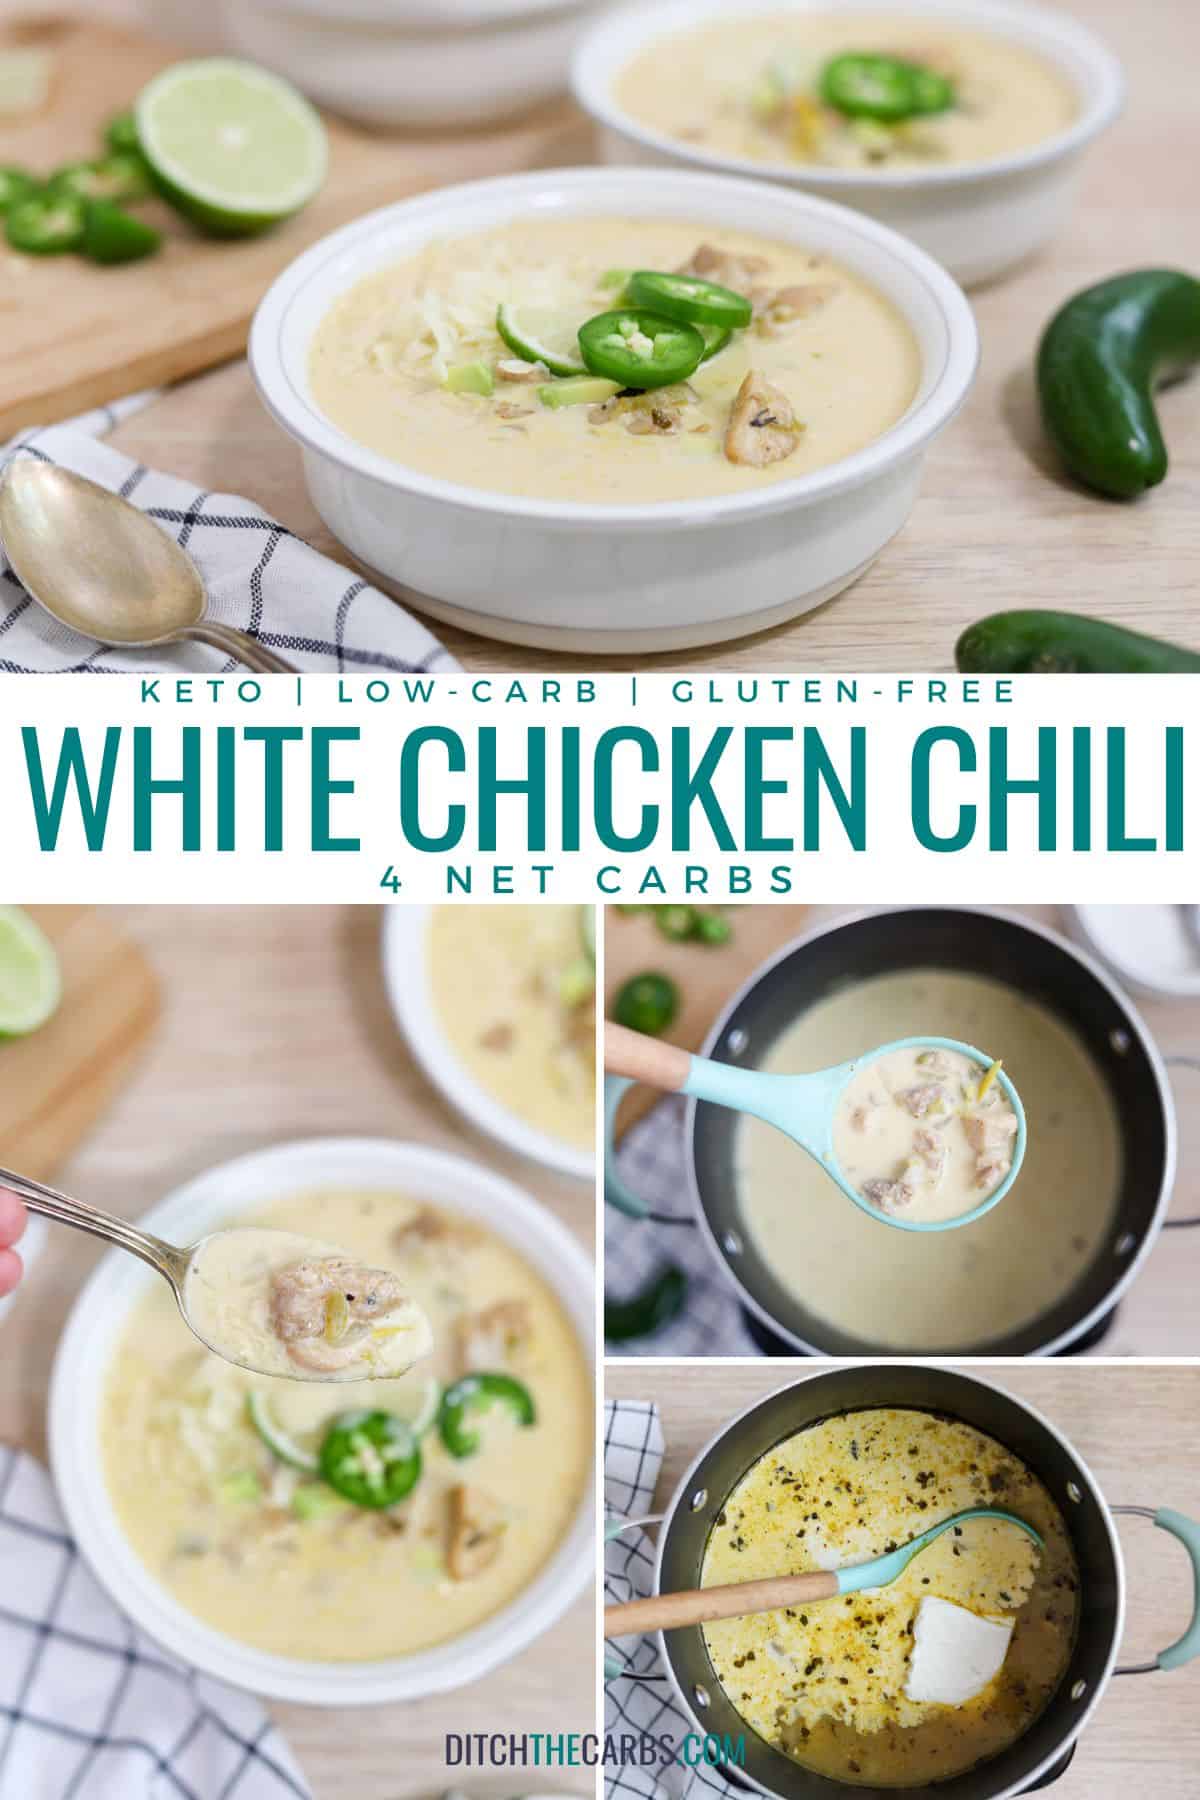 A collage of images showing white chicken chili being made at various stages.